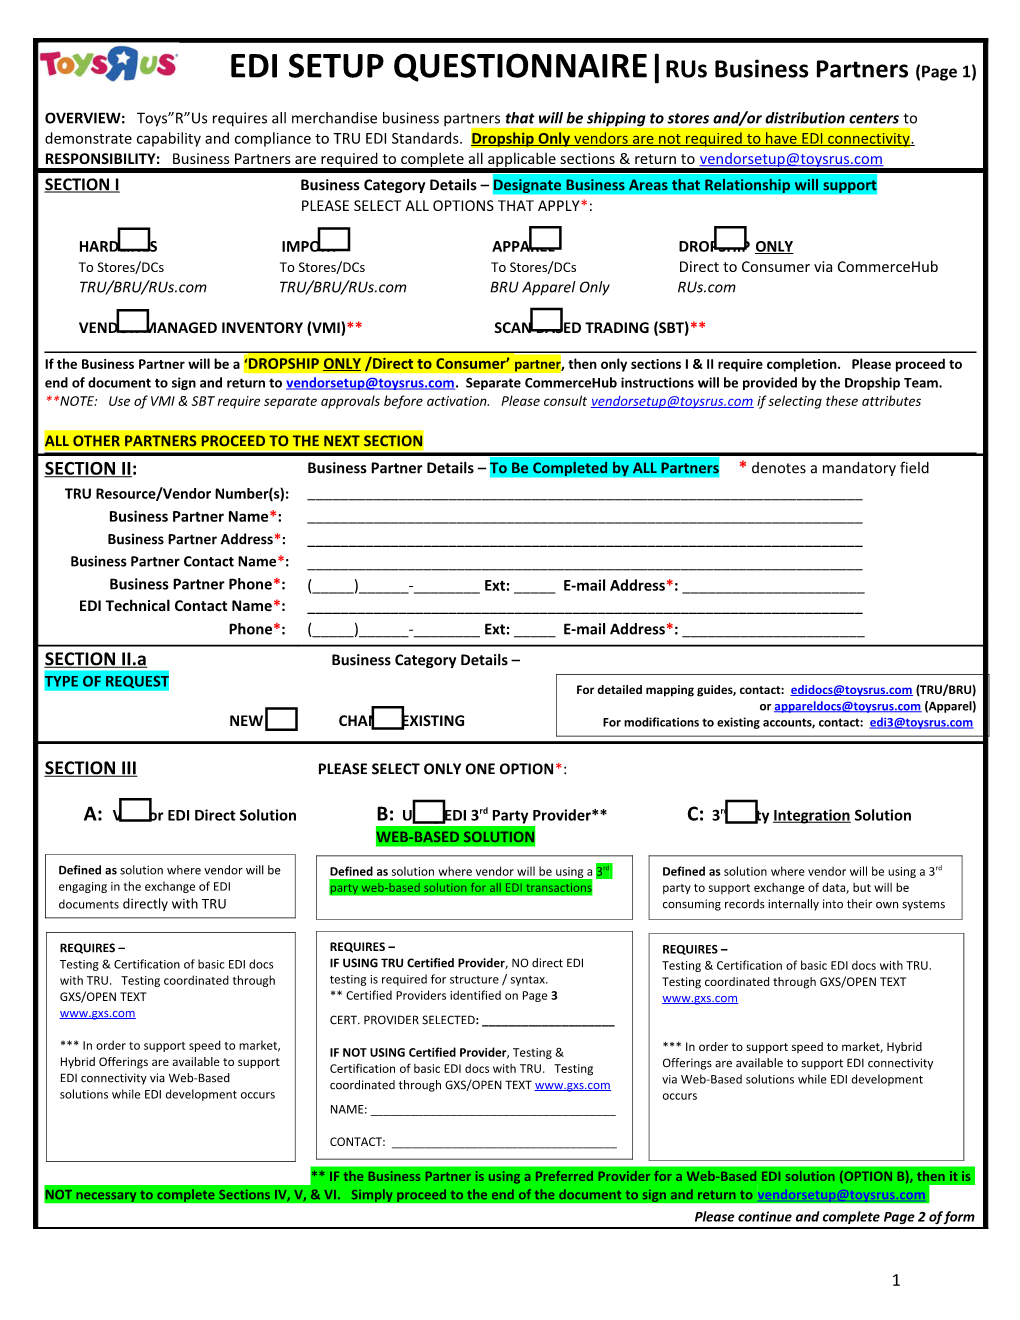 EDI SETUP QUESTIONNAIRE Rus Business Partners (Page 1) OVERVIEW: Toys R Us Requires All